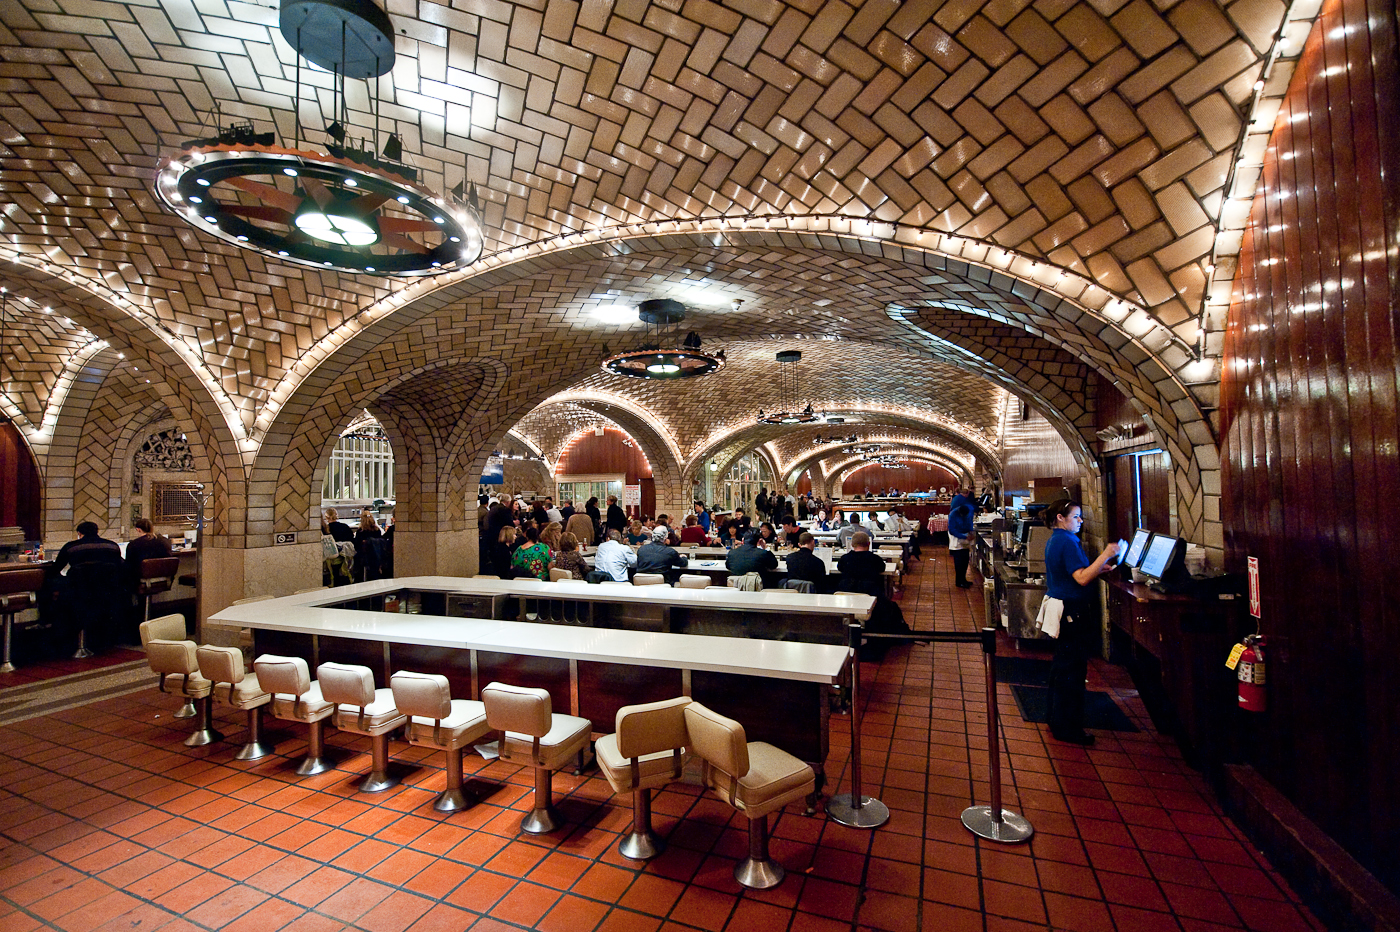 The Grand Central Oyster Bar Restaurant